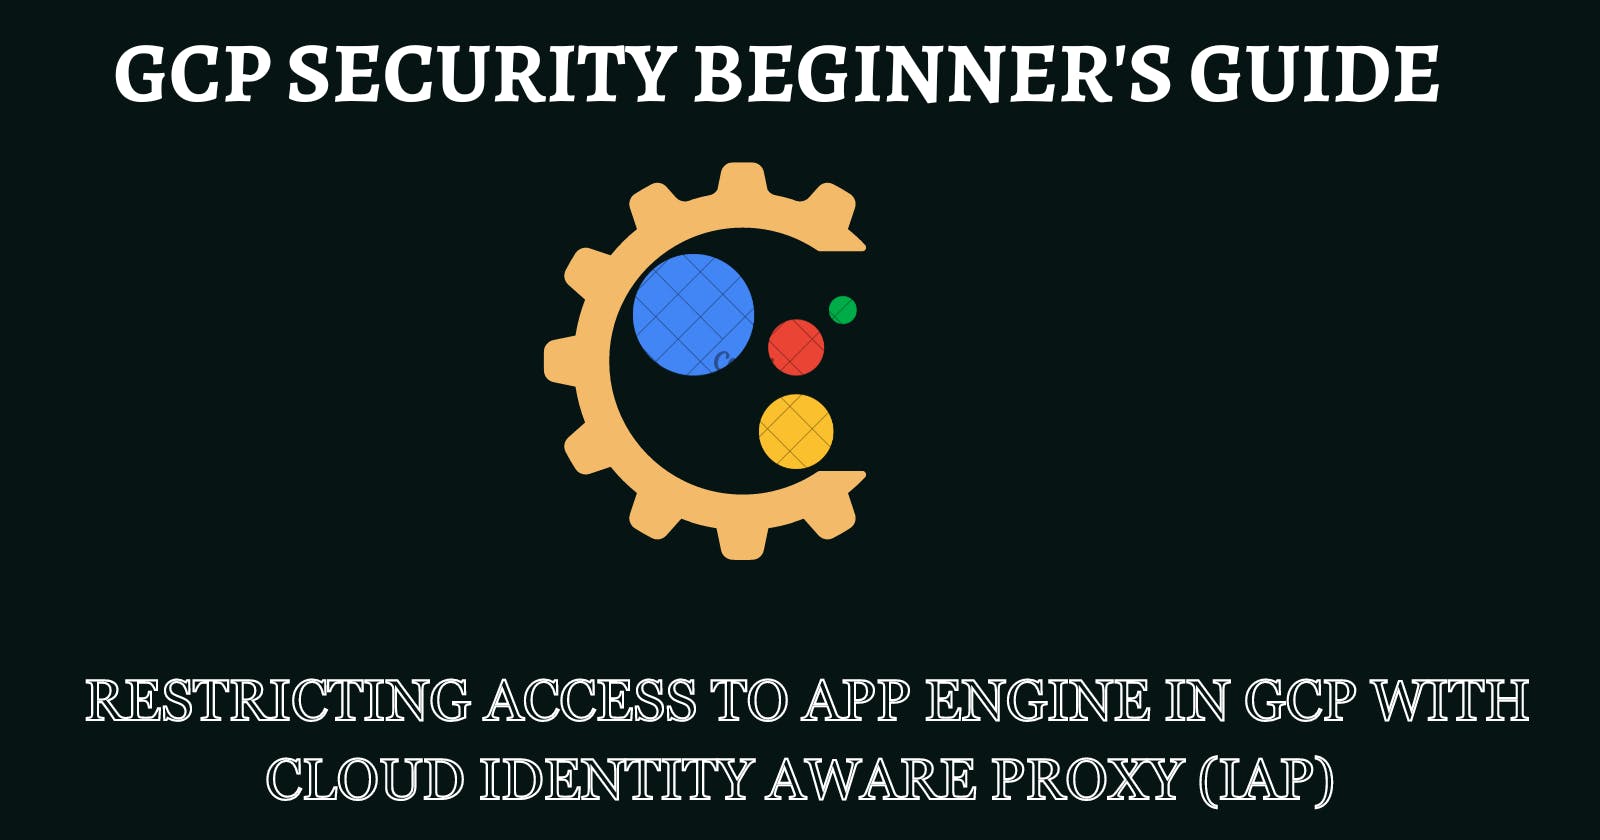 Restricting Access to App Engine in GCP with Cloud Identity Aware Proxy (IAP)